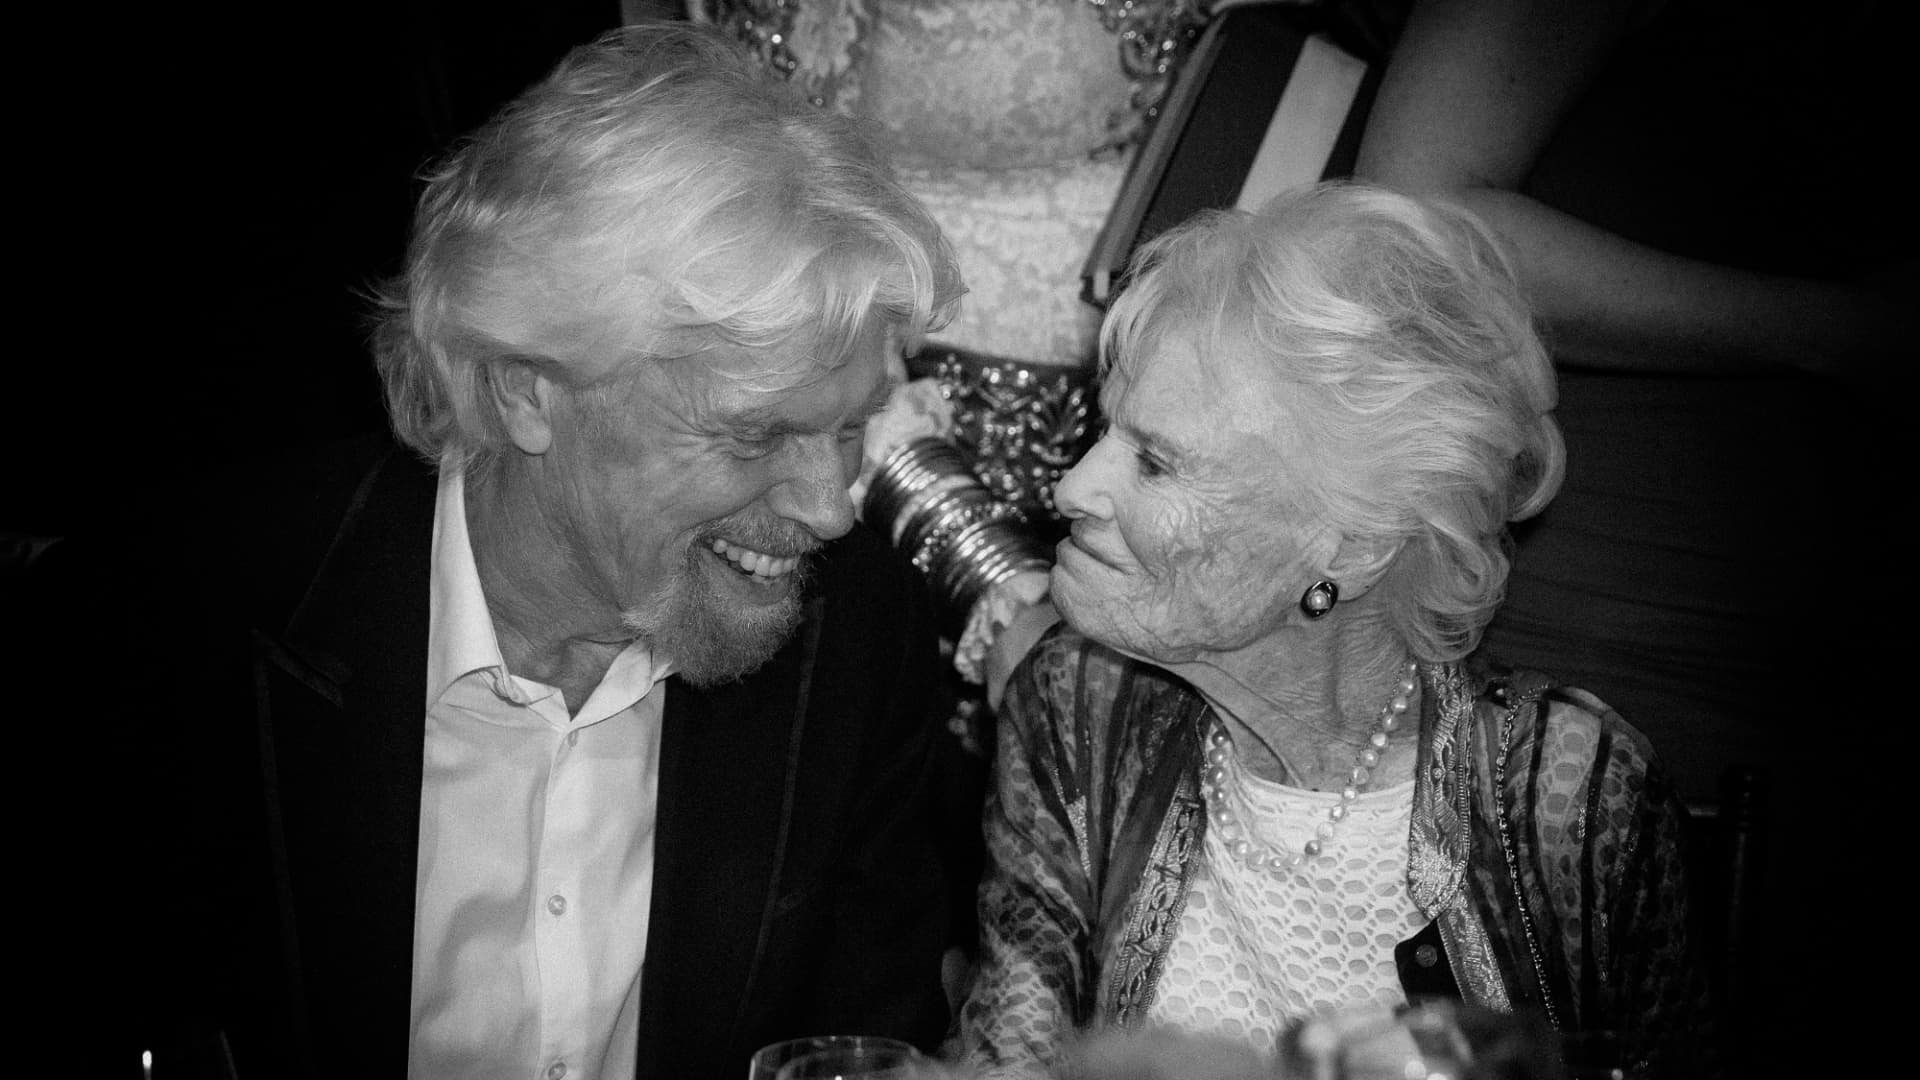 Sir Richard Branson and his mother, Eve Branson, at the AltaMed Health Services' Power Up, We Are The Future Gala at the Beverly Wilshire Four Seasons Hotel on May 12, 2016 in Beverly Hills, California.